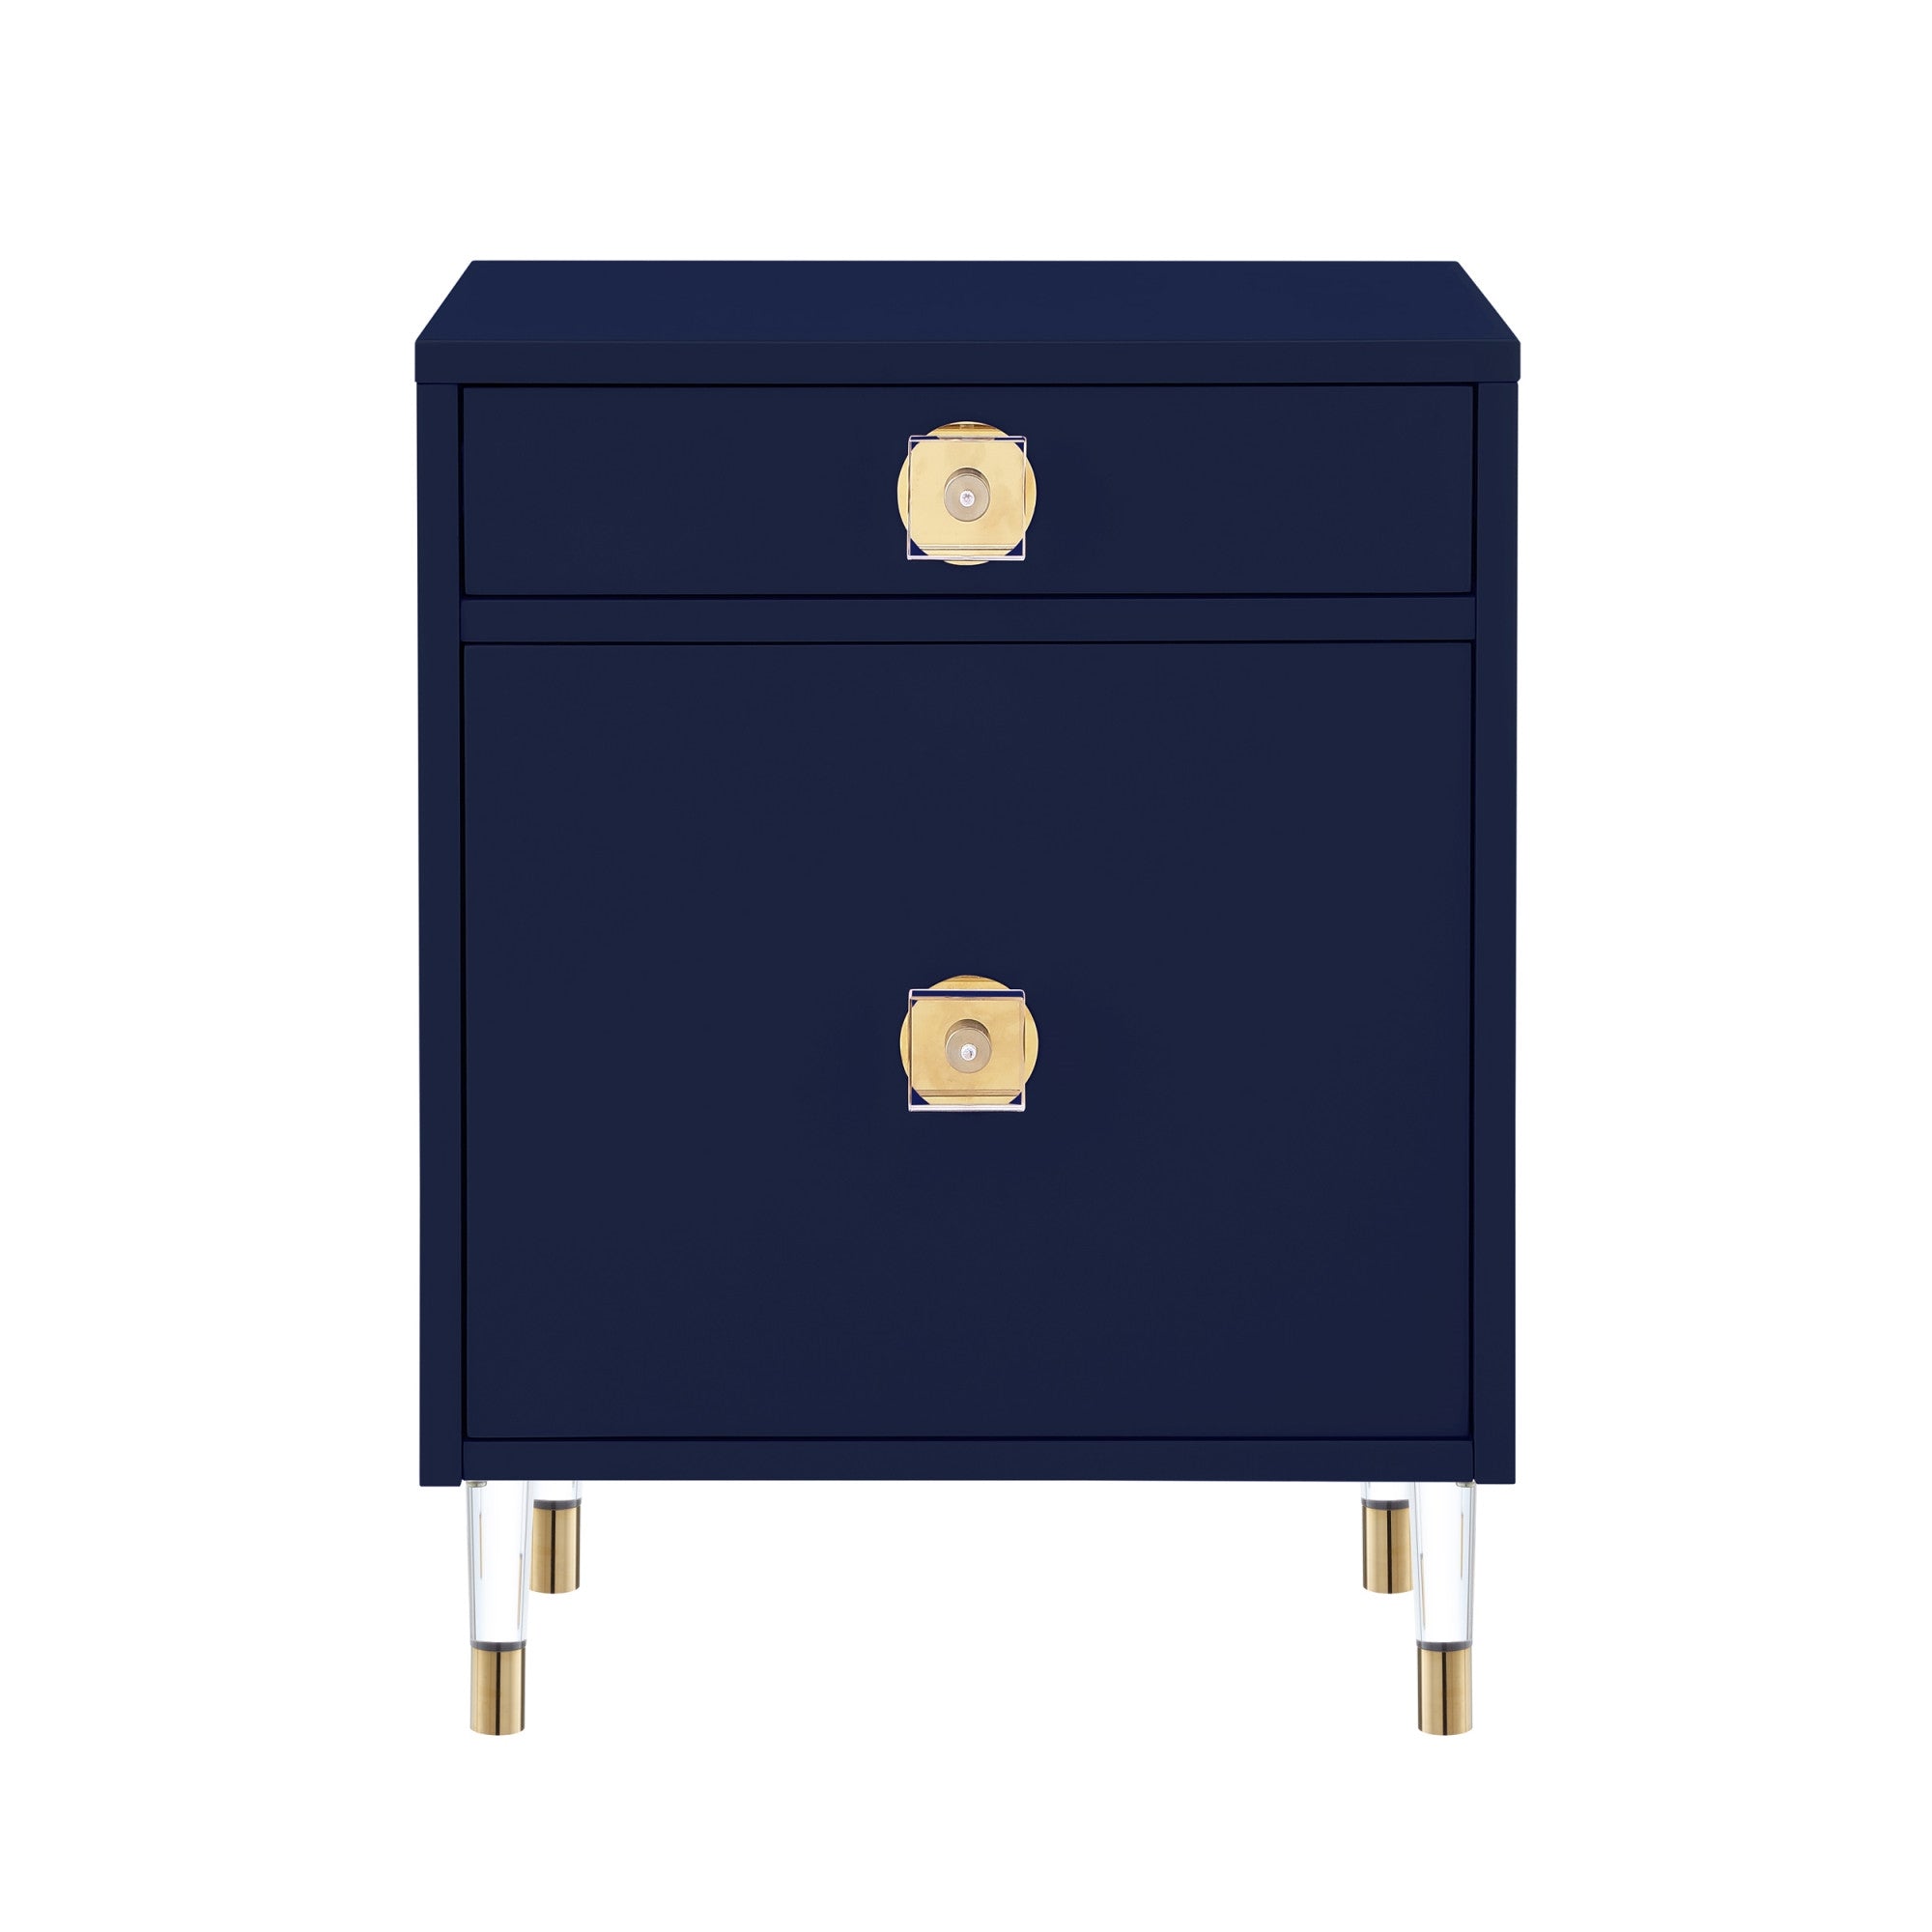 26" Clear and Dark Blue End Table with Drawer and shelf